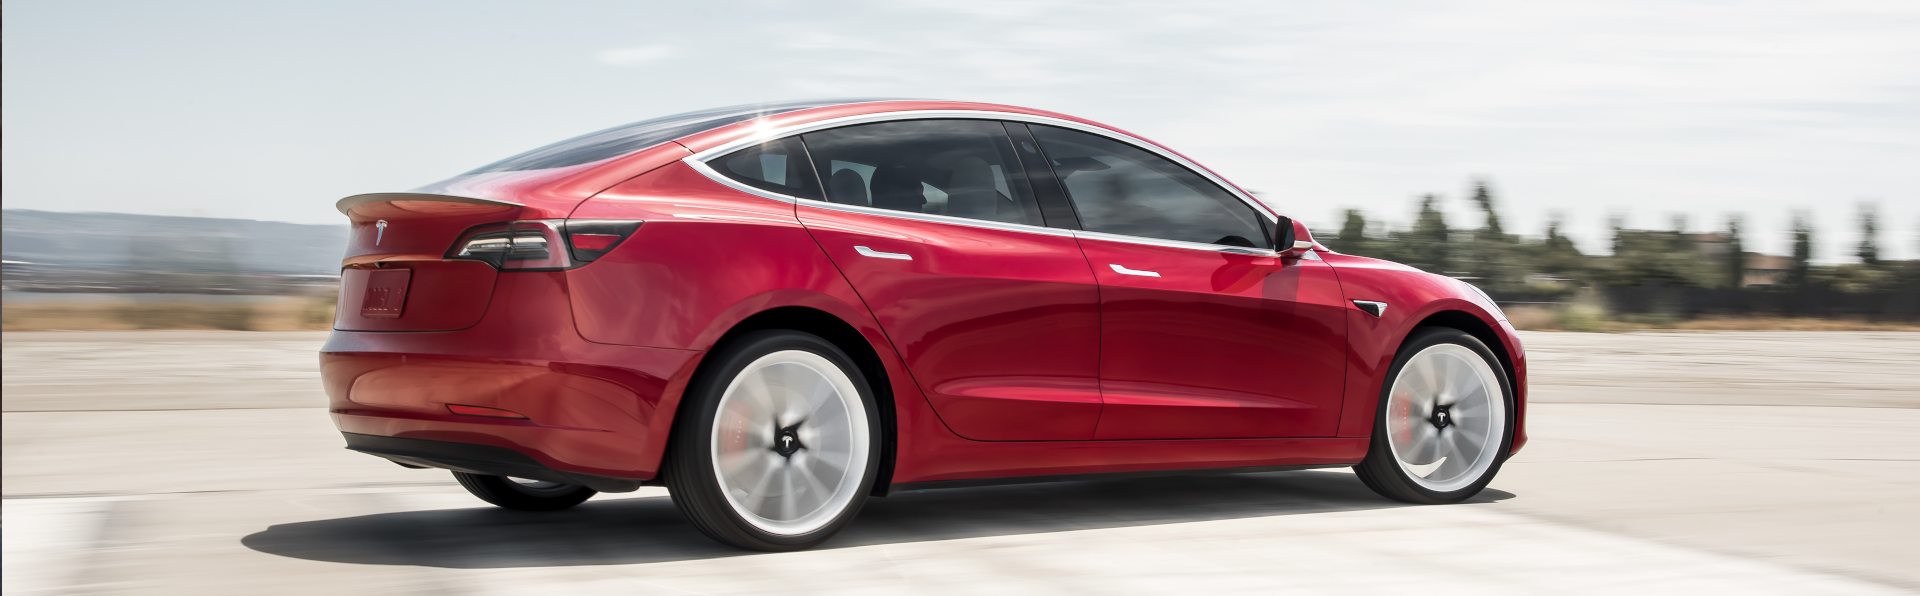 Tesla Model 3 car review: the all-electric executive